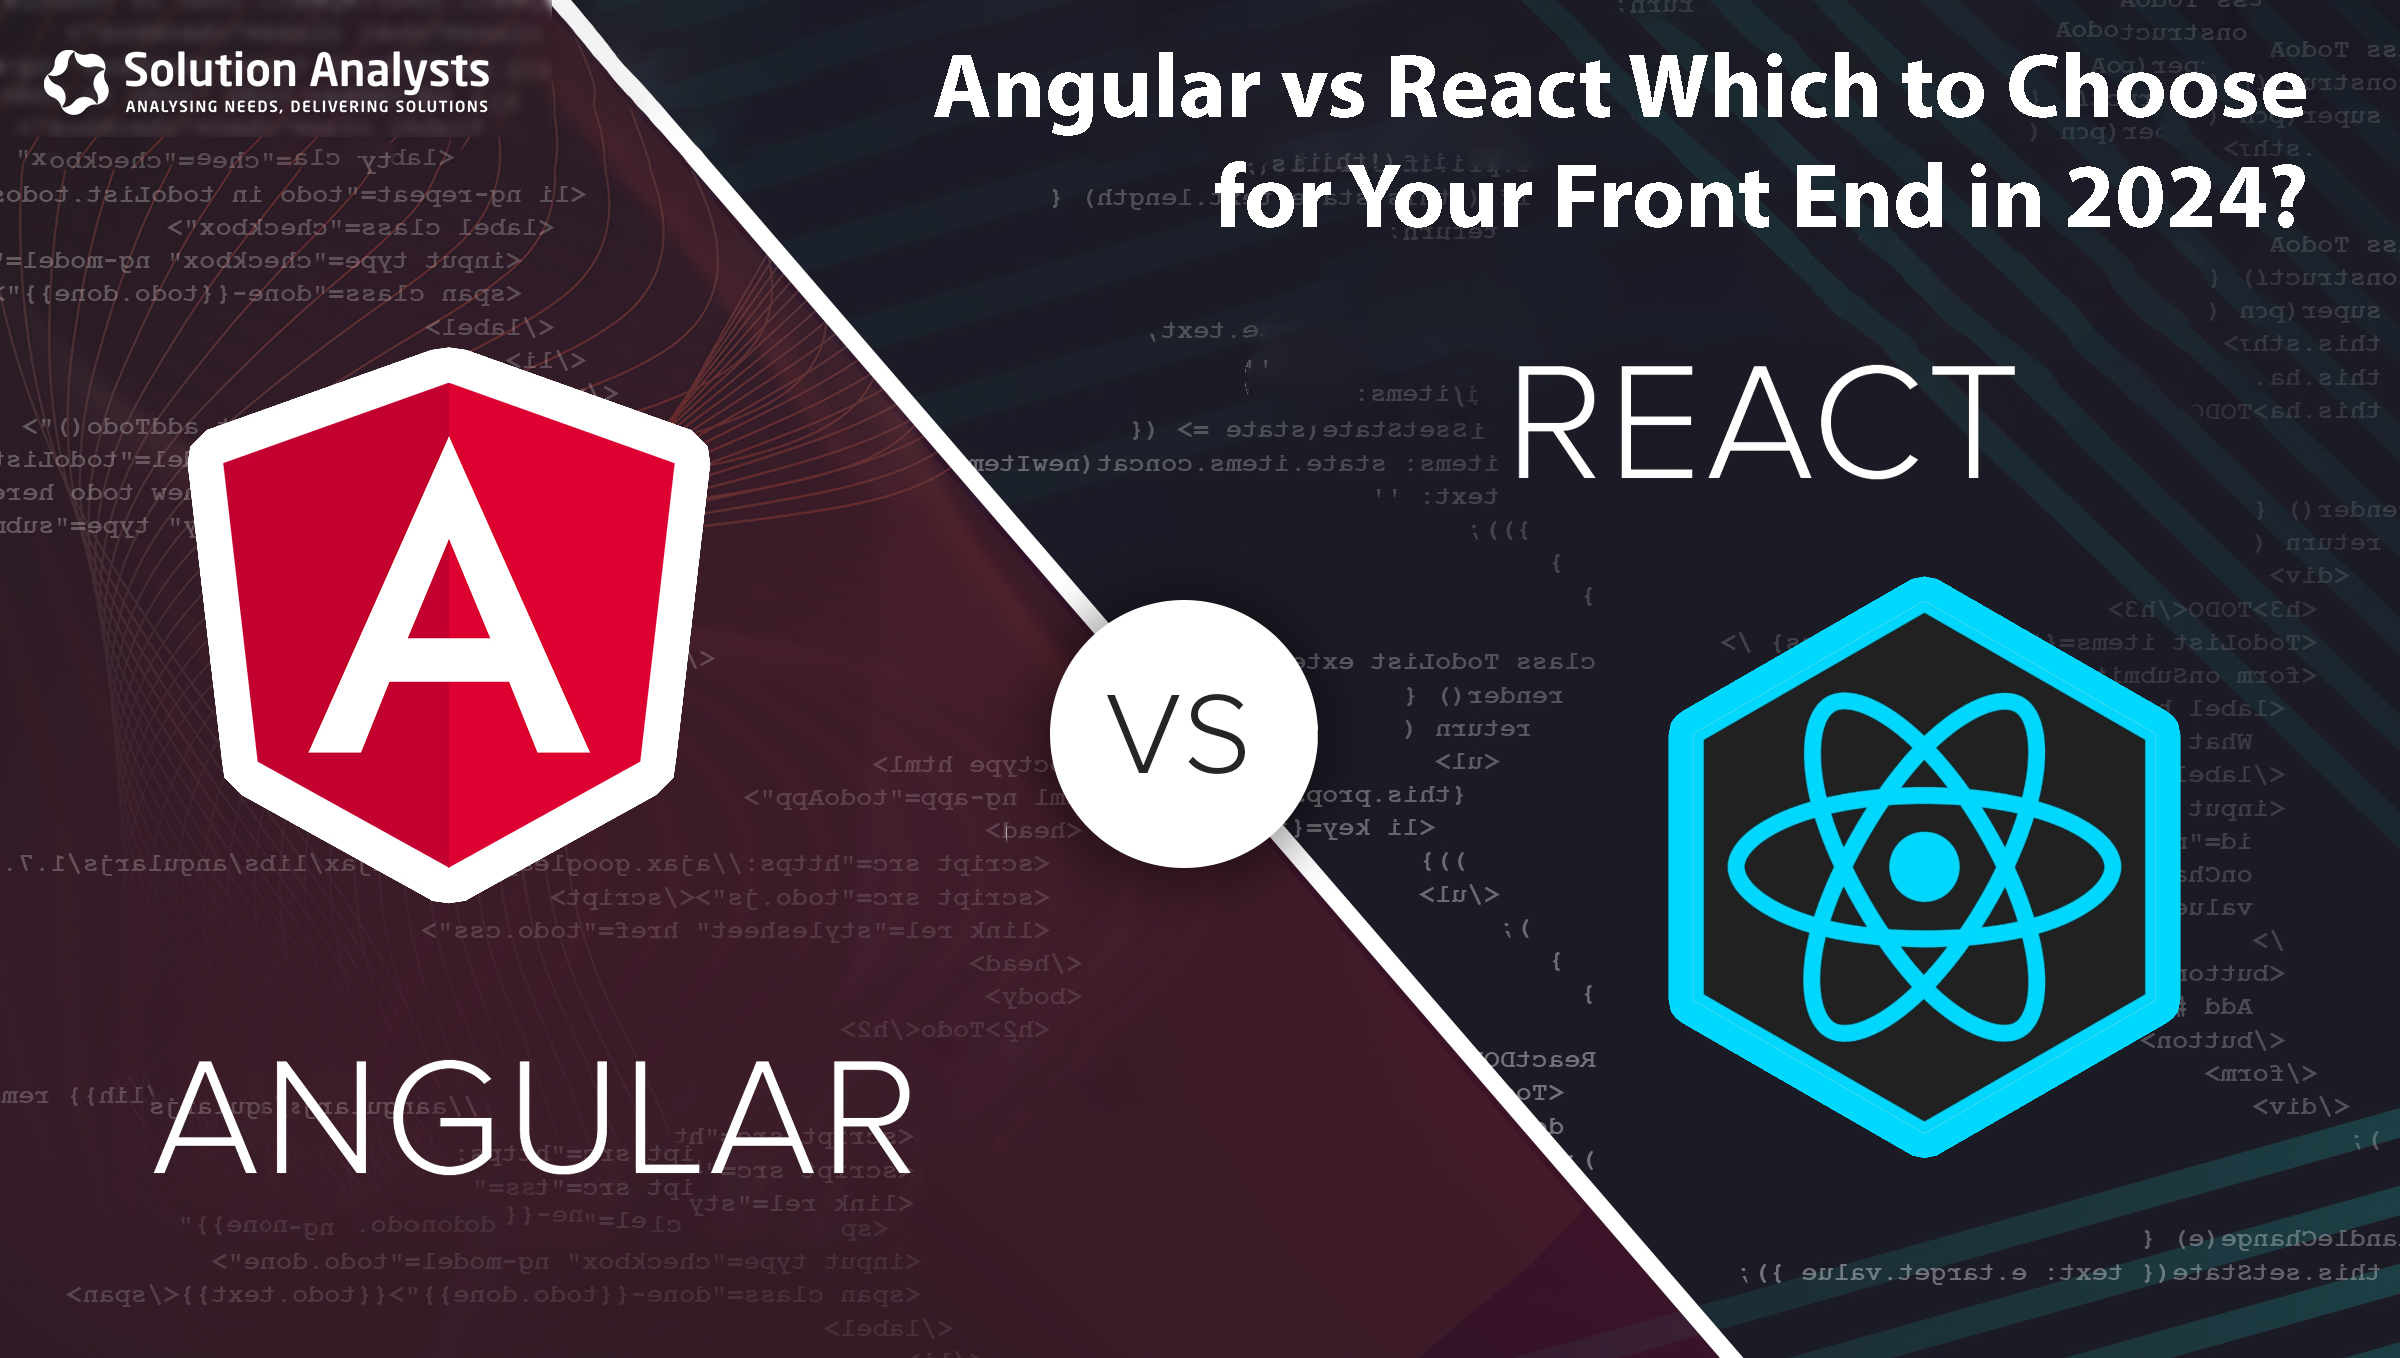 Angular vs React Which to Choose for Your Front End in 2024?